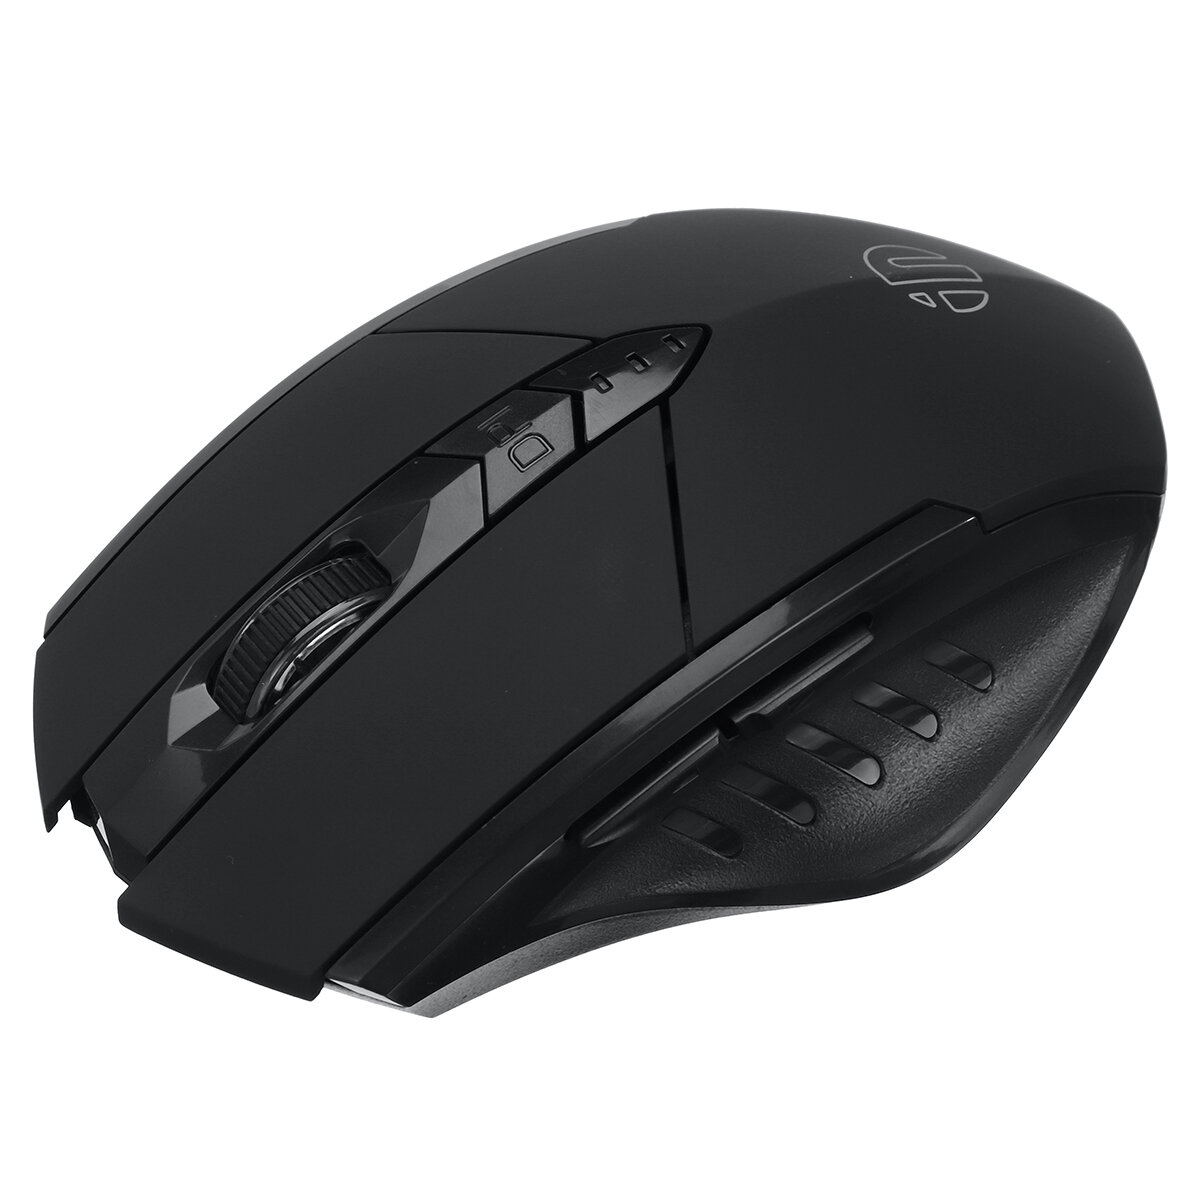 INPHIC PM6 Wireless Mouse 2.4GHz Receiver bluetooth 4.0 5.0 Triple Mode Ergonomic USB Rechargeable Mice Power Display Ve